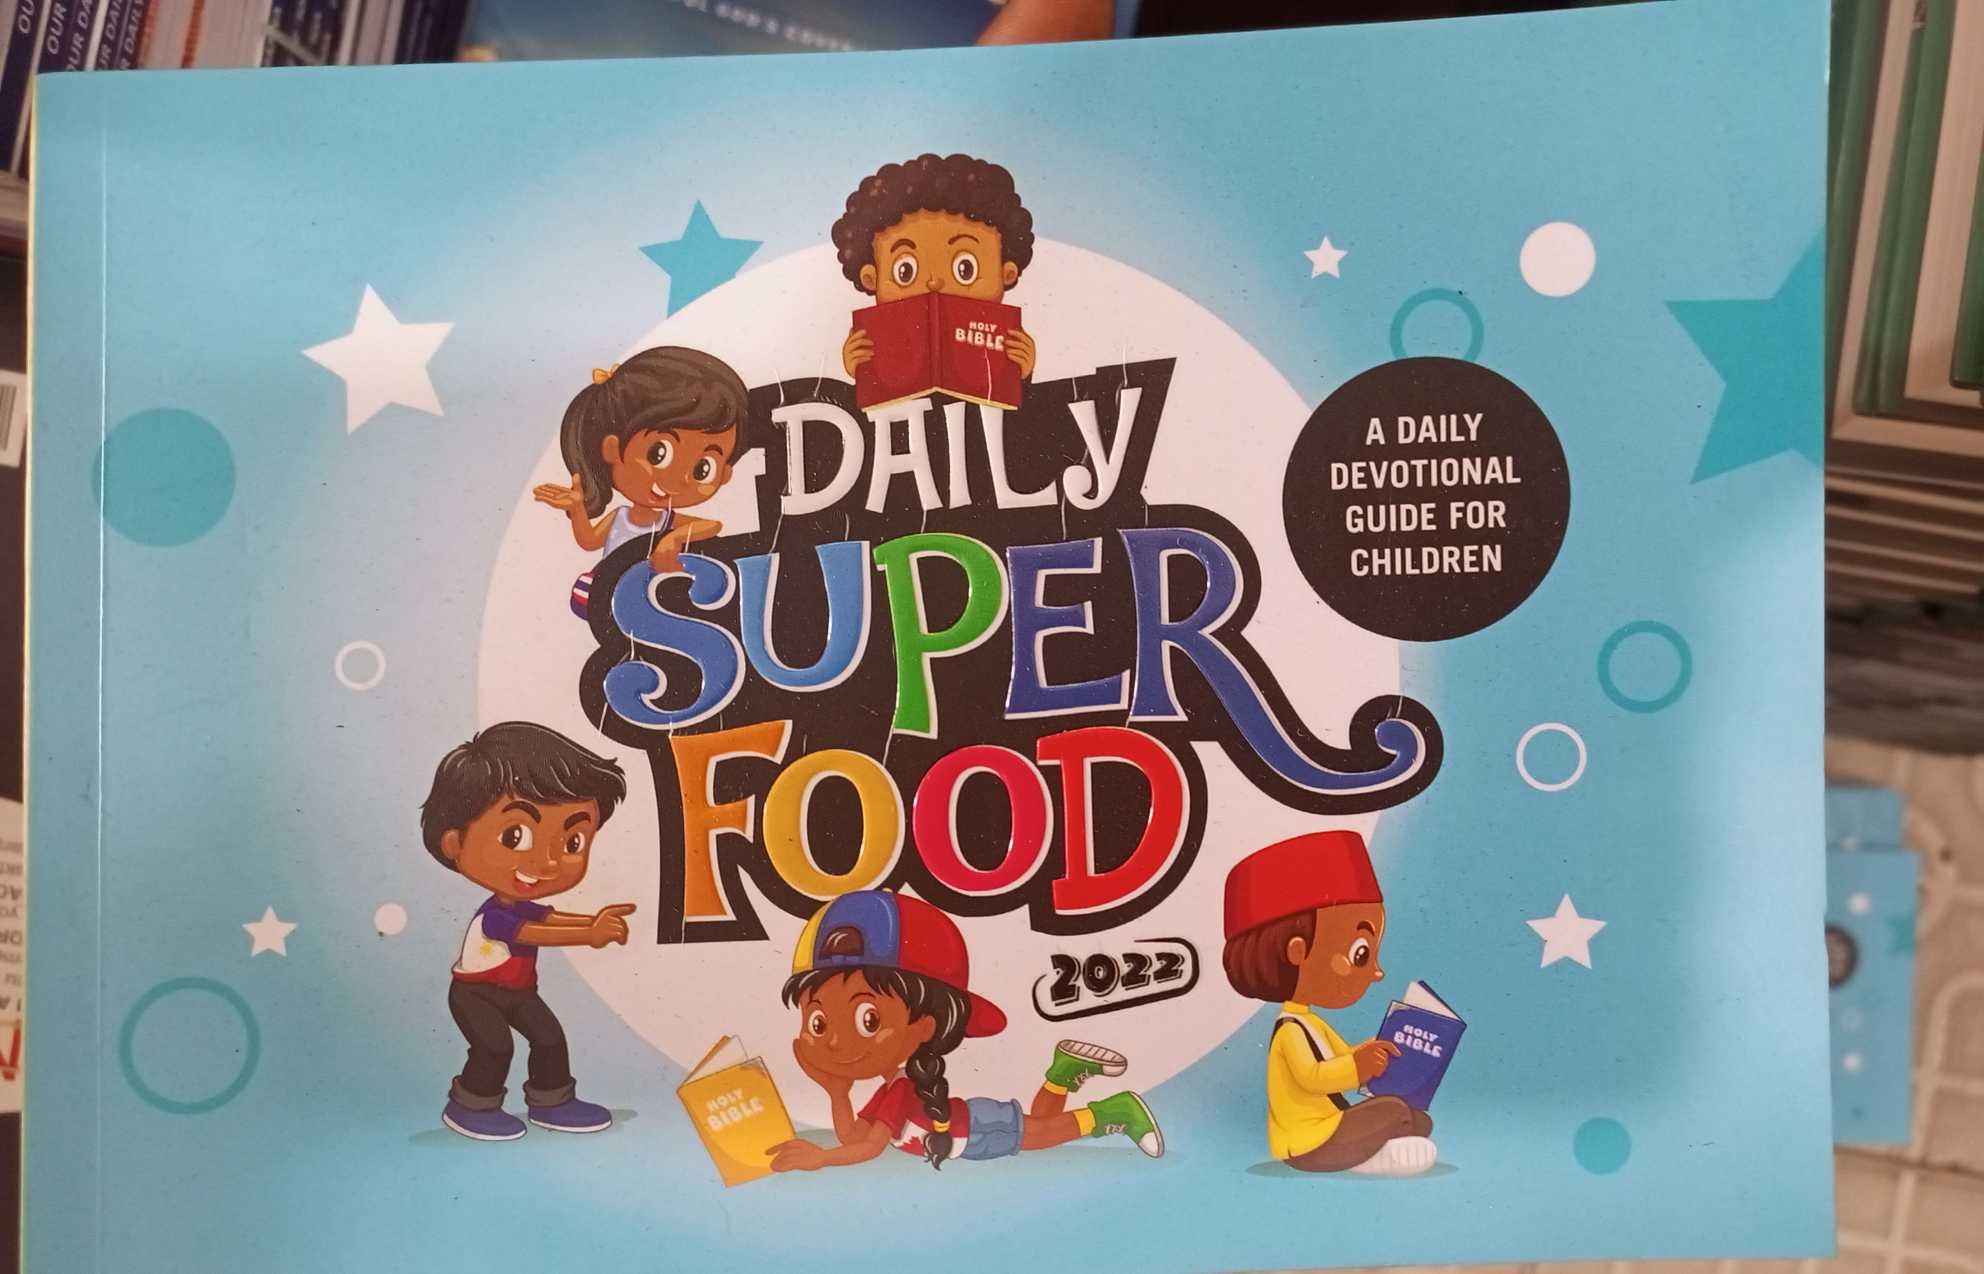 Daily Super Food 2022